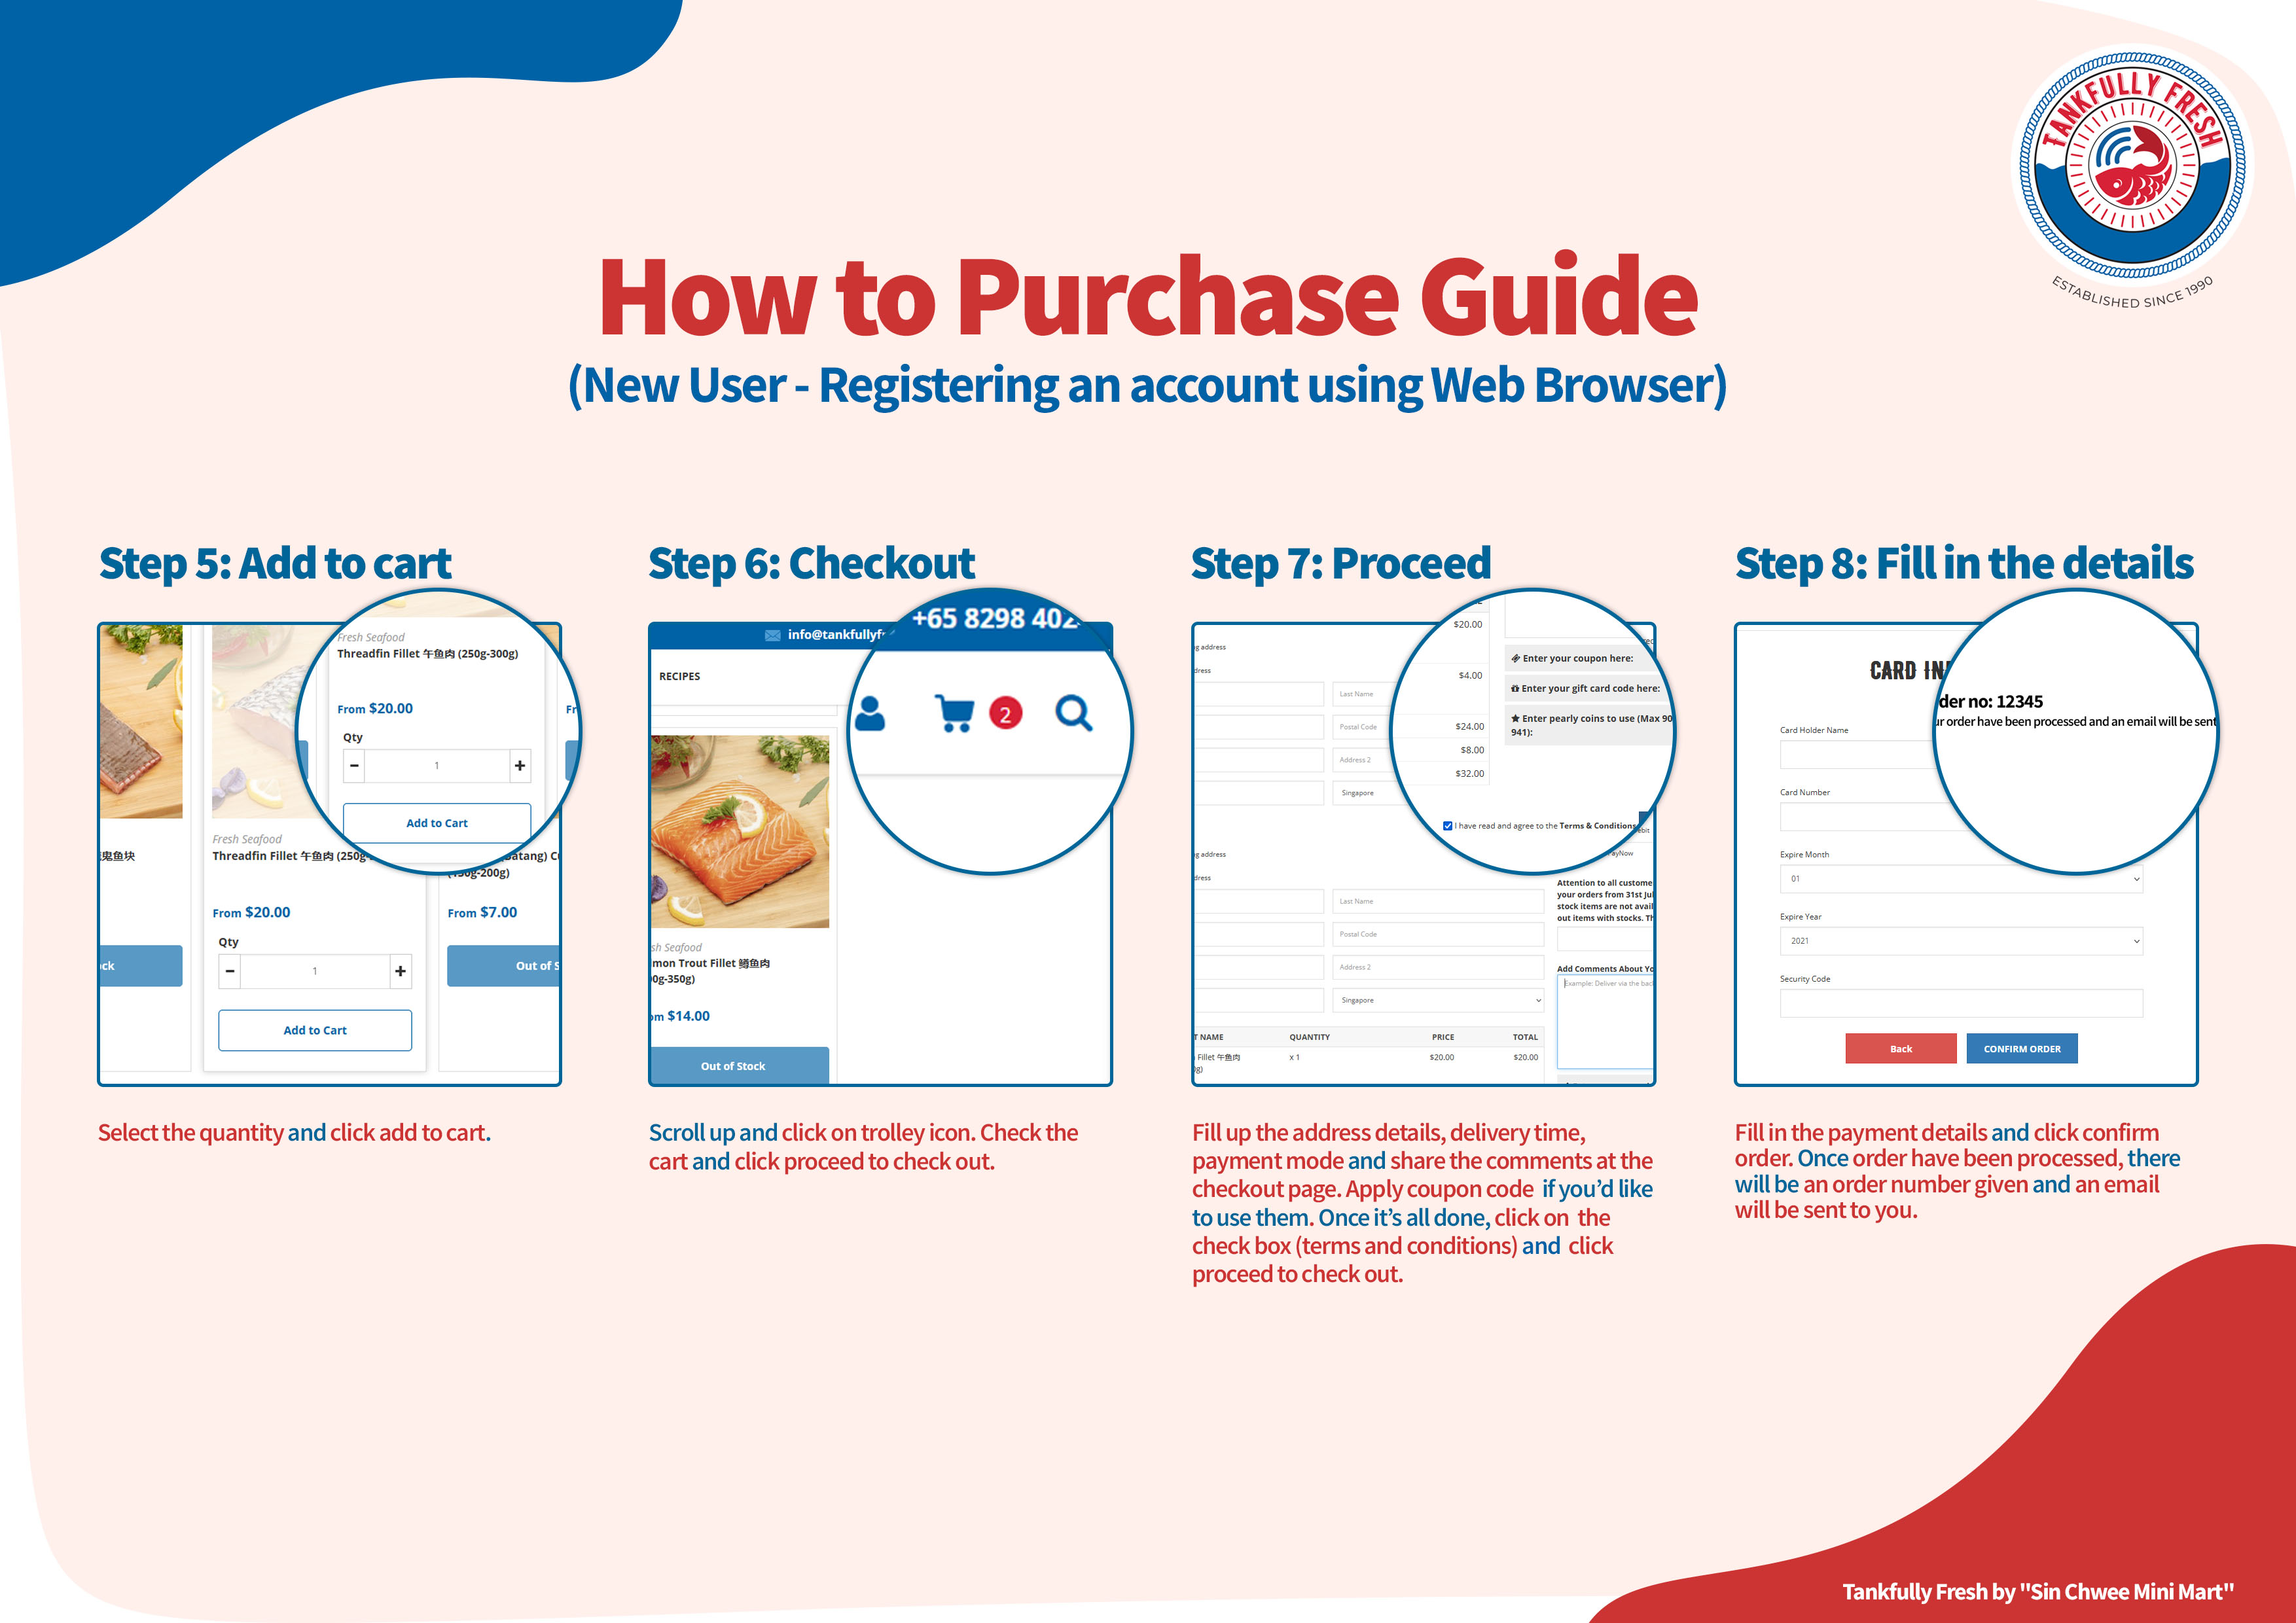 How to Purchase - New User Guide  Artboard 1